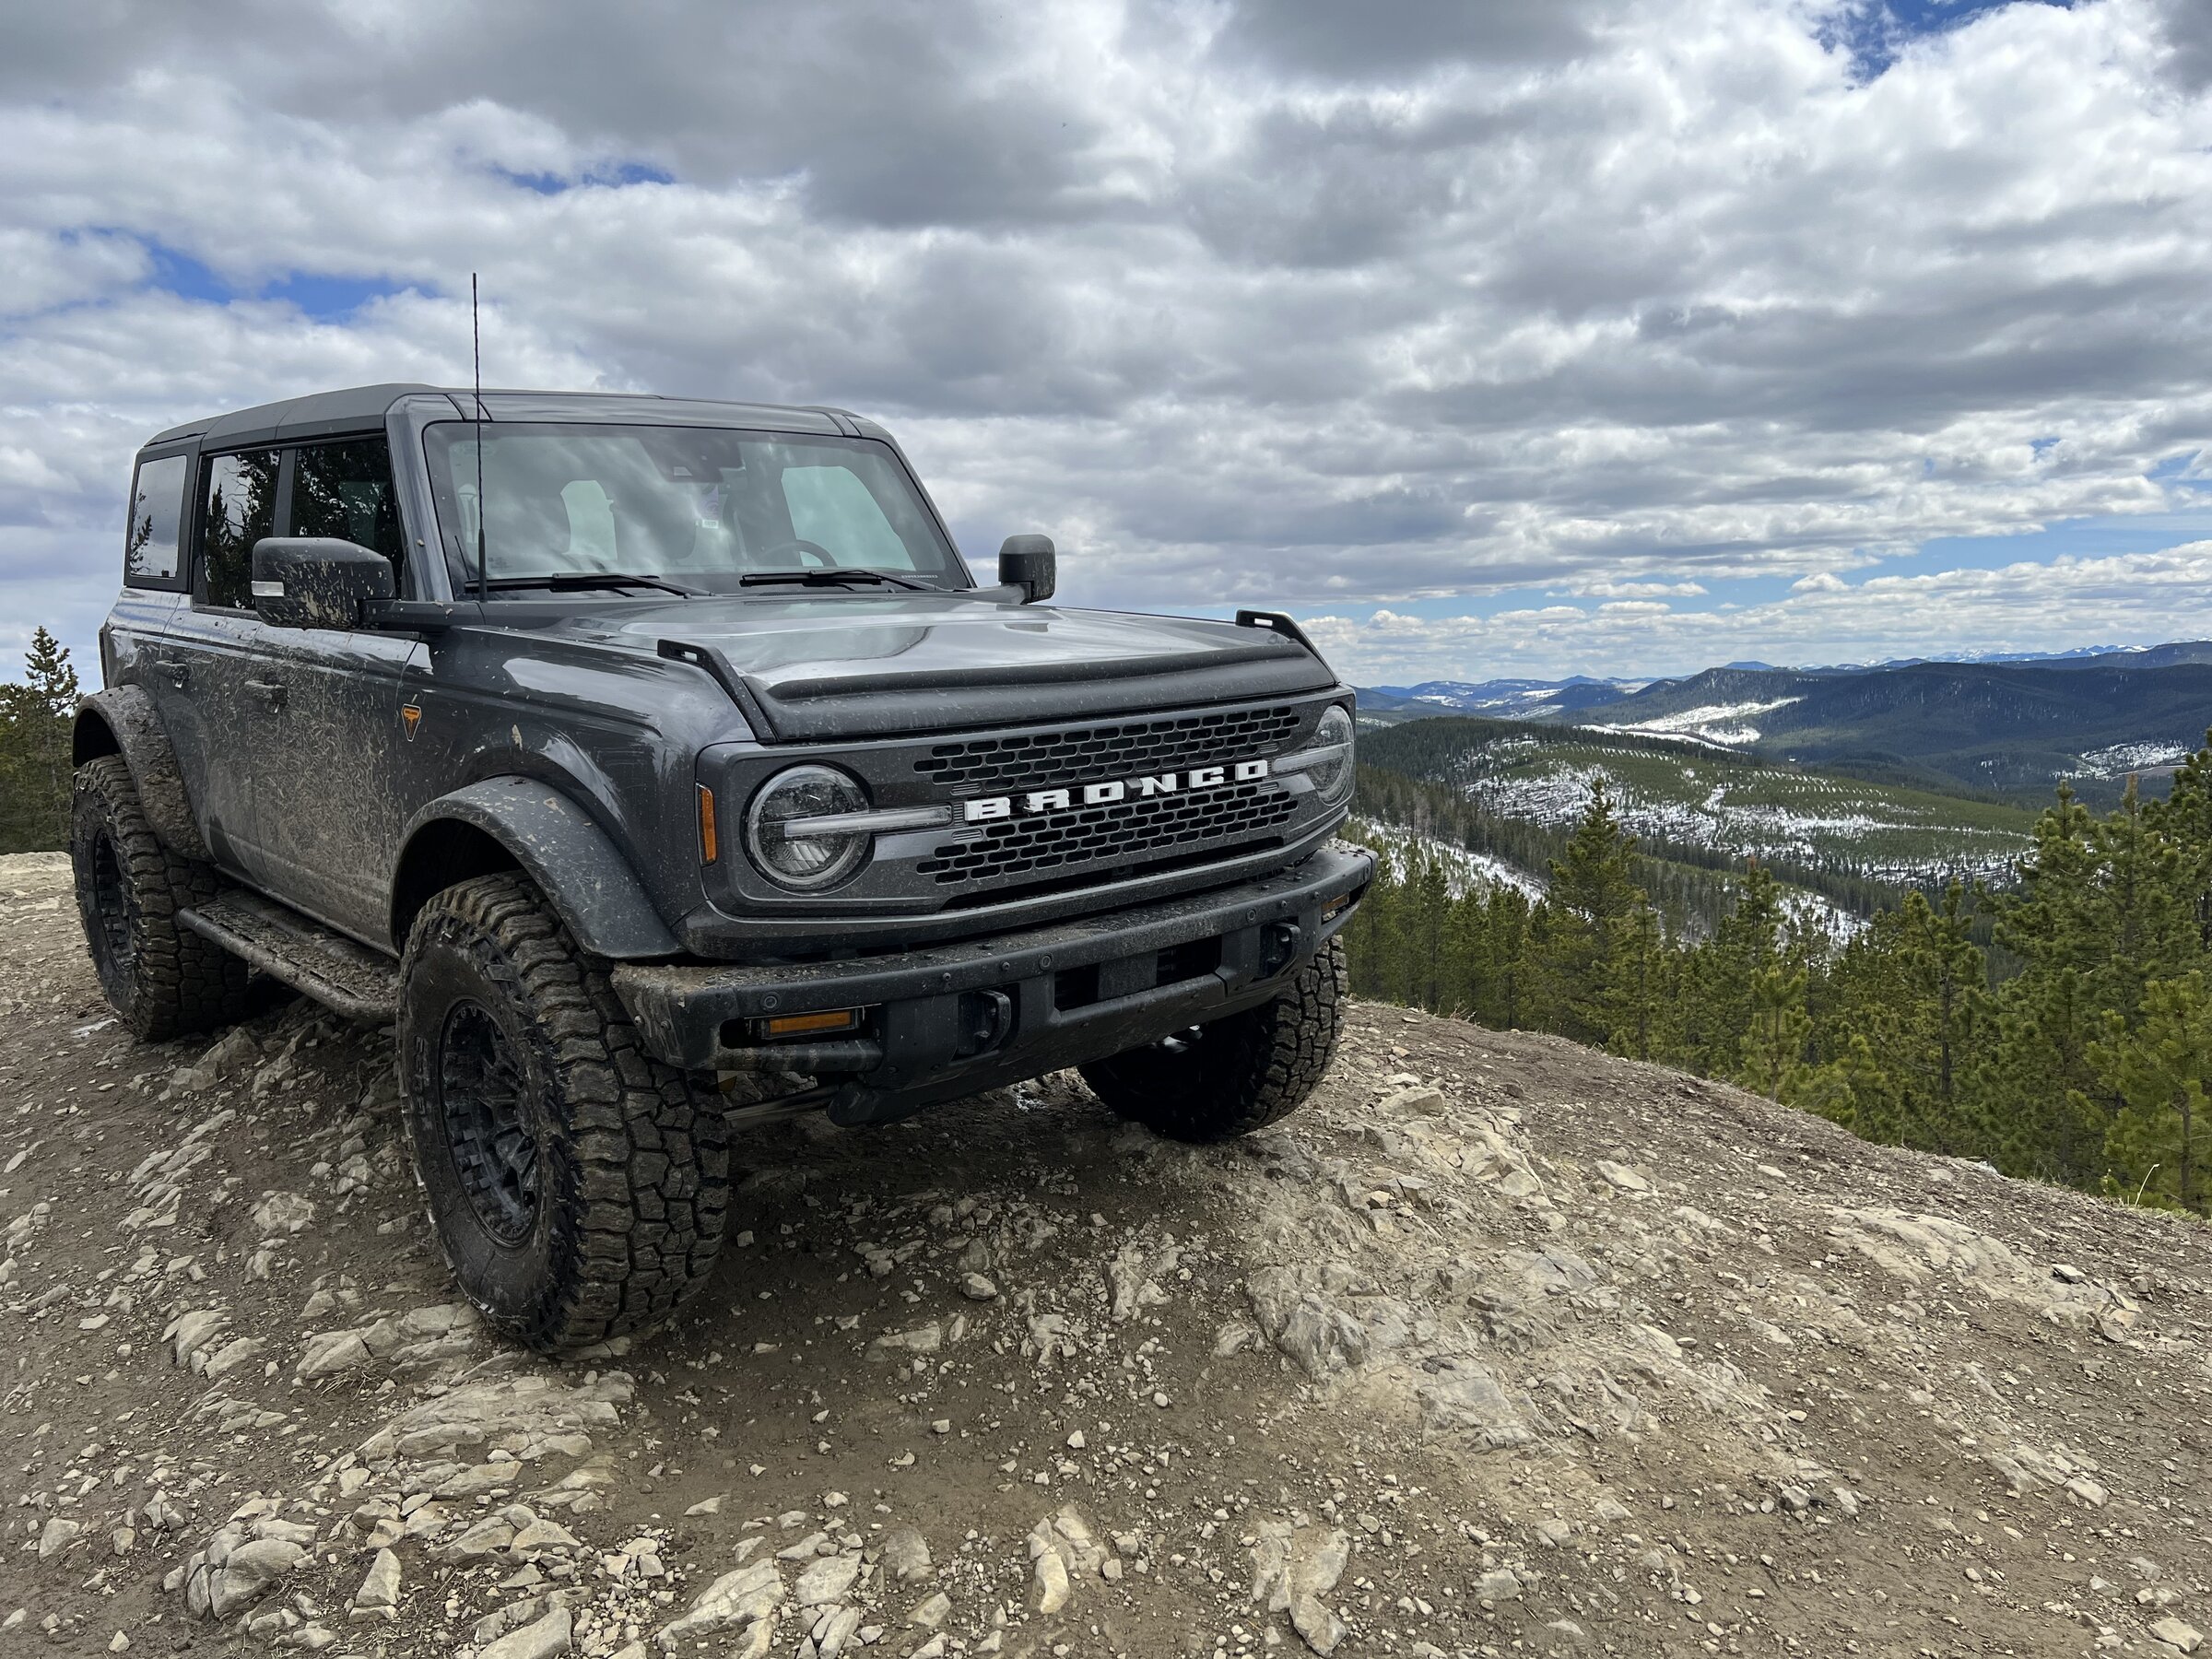 Ford Bronco Let’s see your favorite picture of your Bronco! DCBEE490-1CBF-4787-A7B2-BF17FC0D41DD